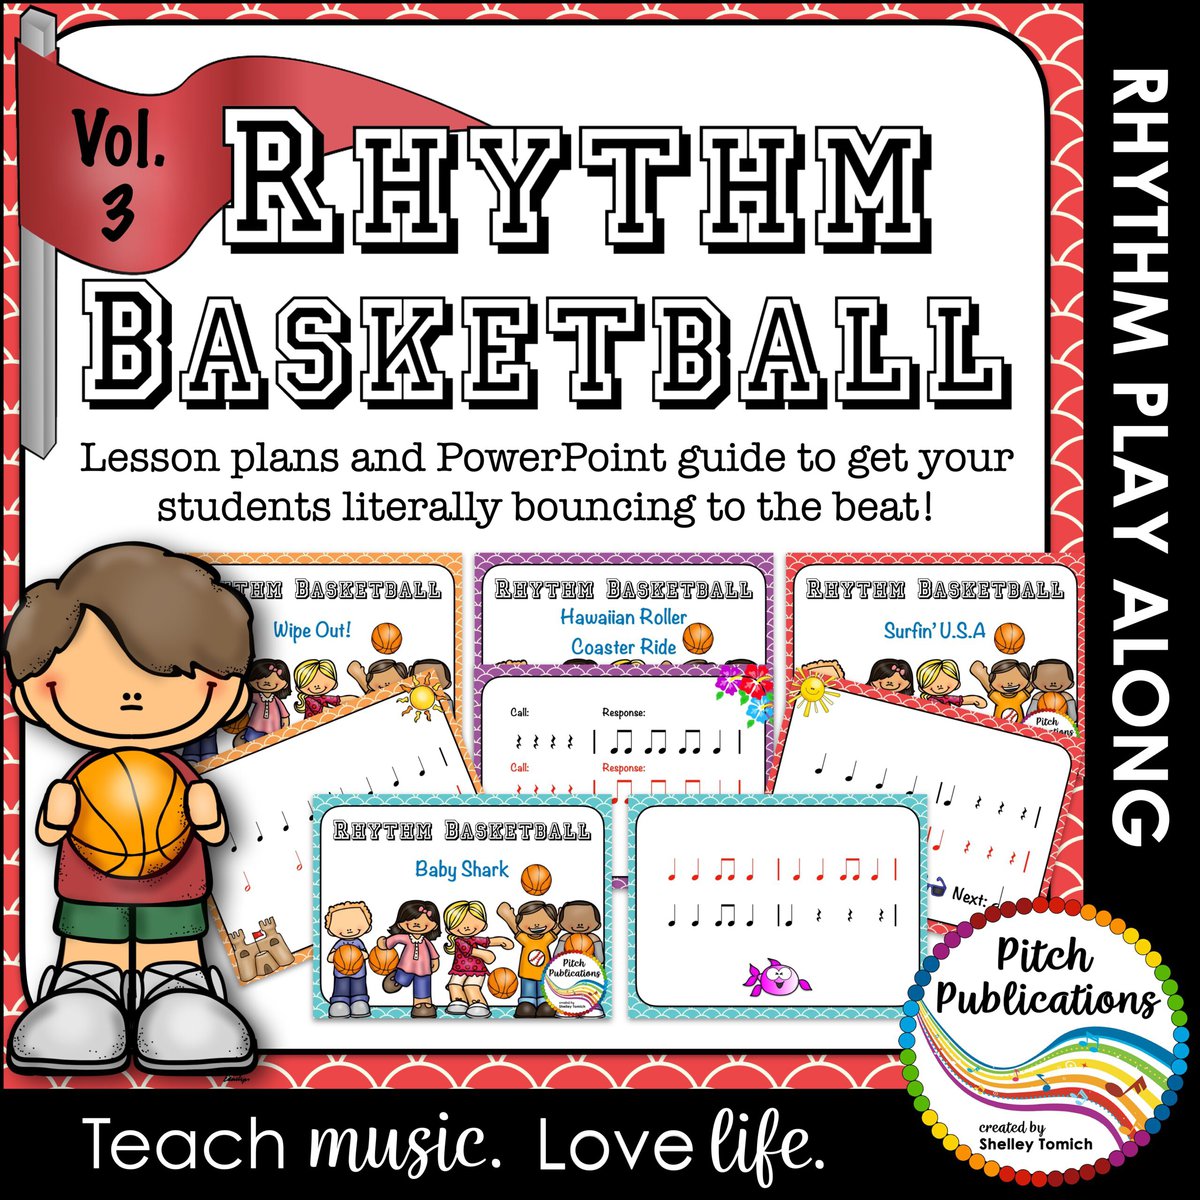 The words Rhythm Basketball in athletic jersey letters. Underneath are slide examples with song titles including Surfin' U.S.A., Baby Shark, Wipe Out, and Hawaiian Roller Coaster Ride. Image of small child with basketball.